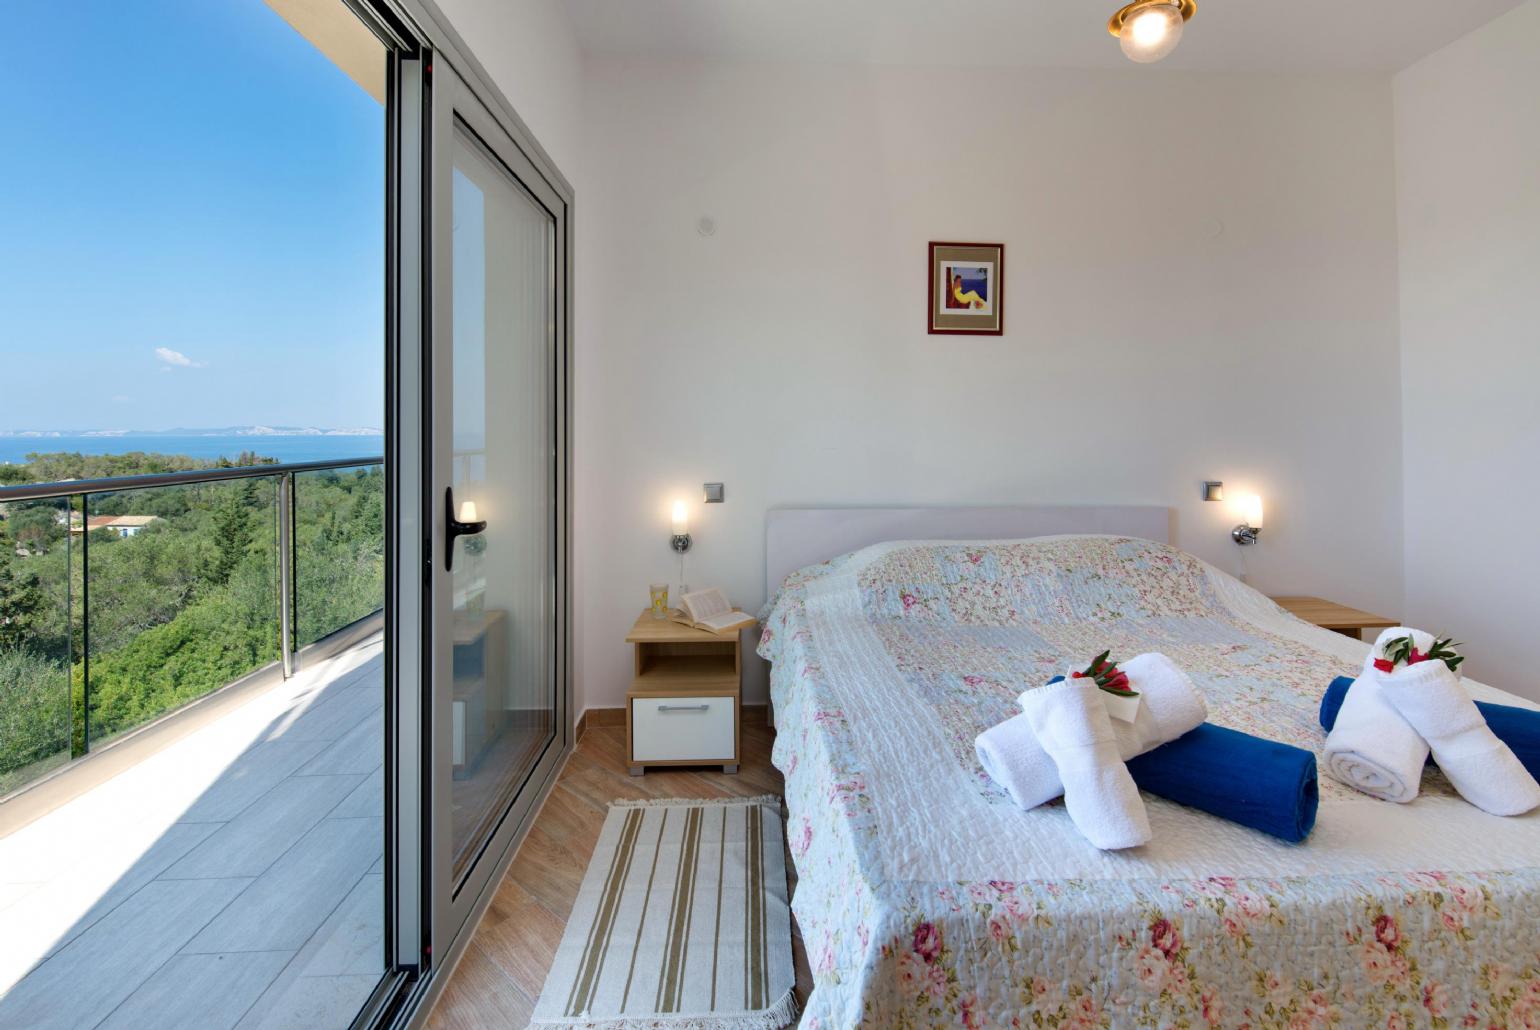 Double bedroom with terrace access and beautiful view 